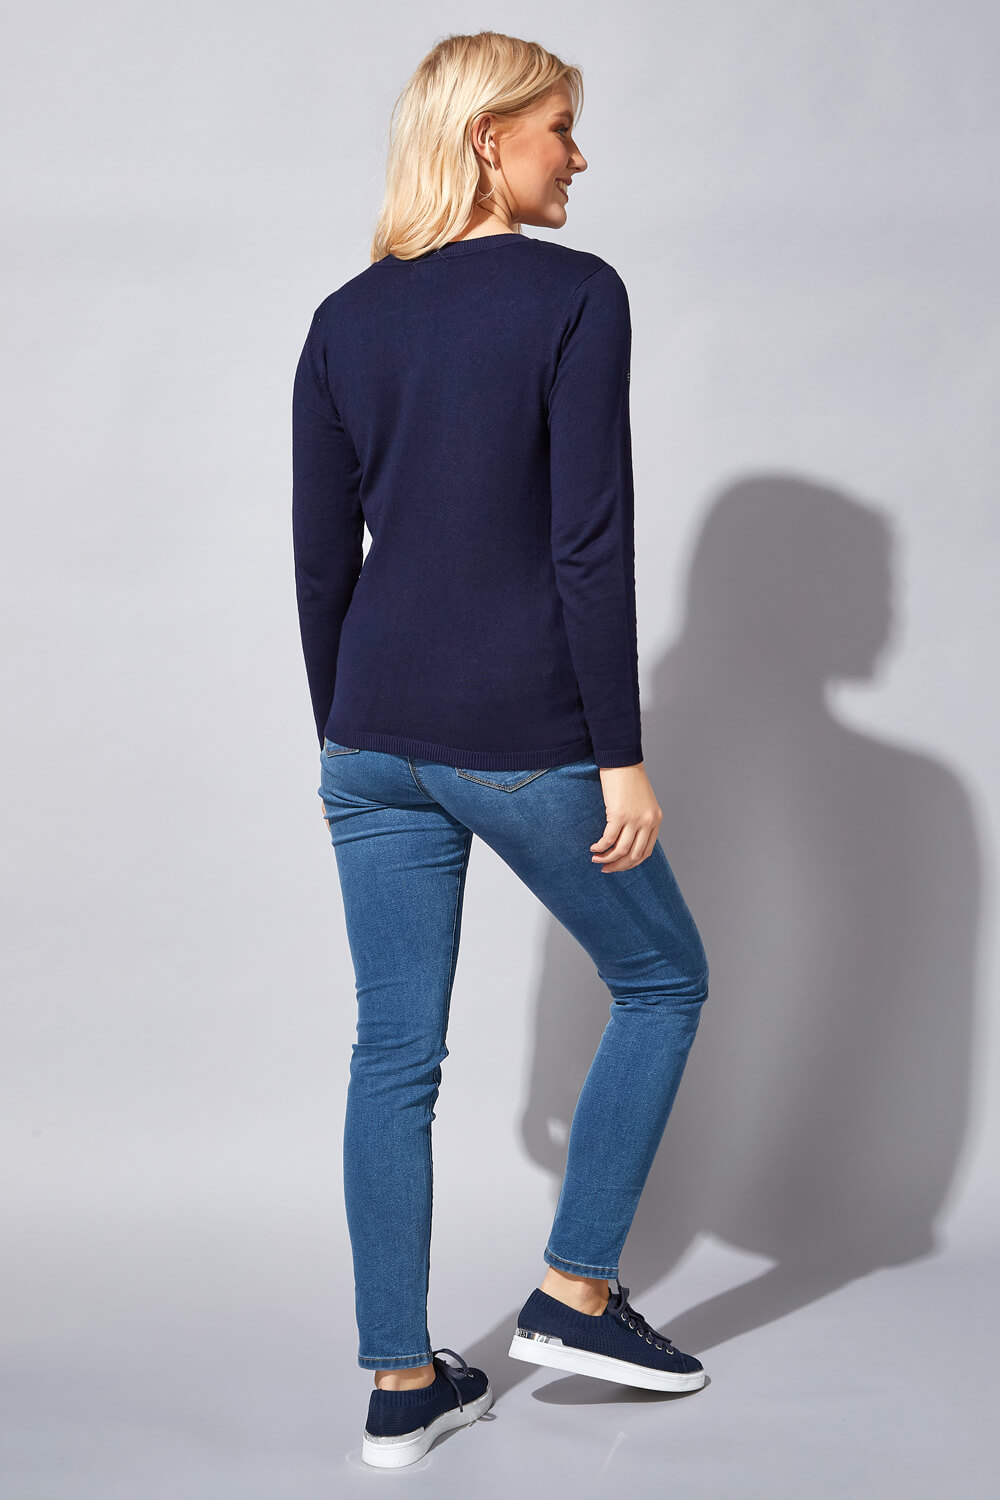 Navy  Daisy Floral Embroidered Jumper, Image 3 of 4